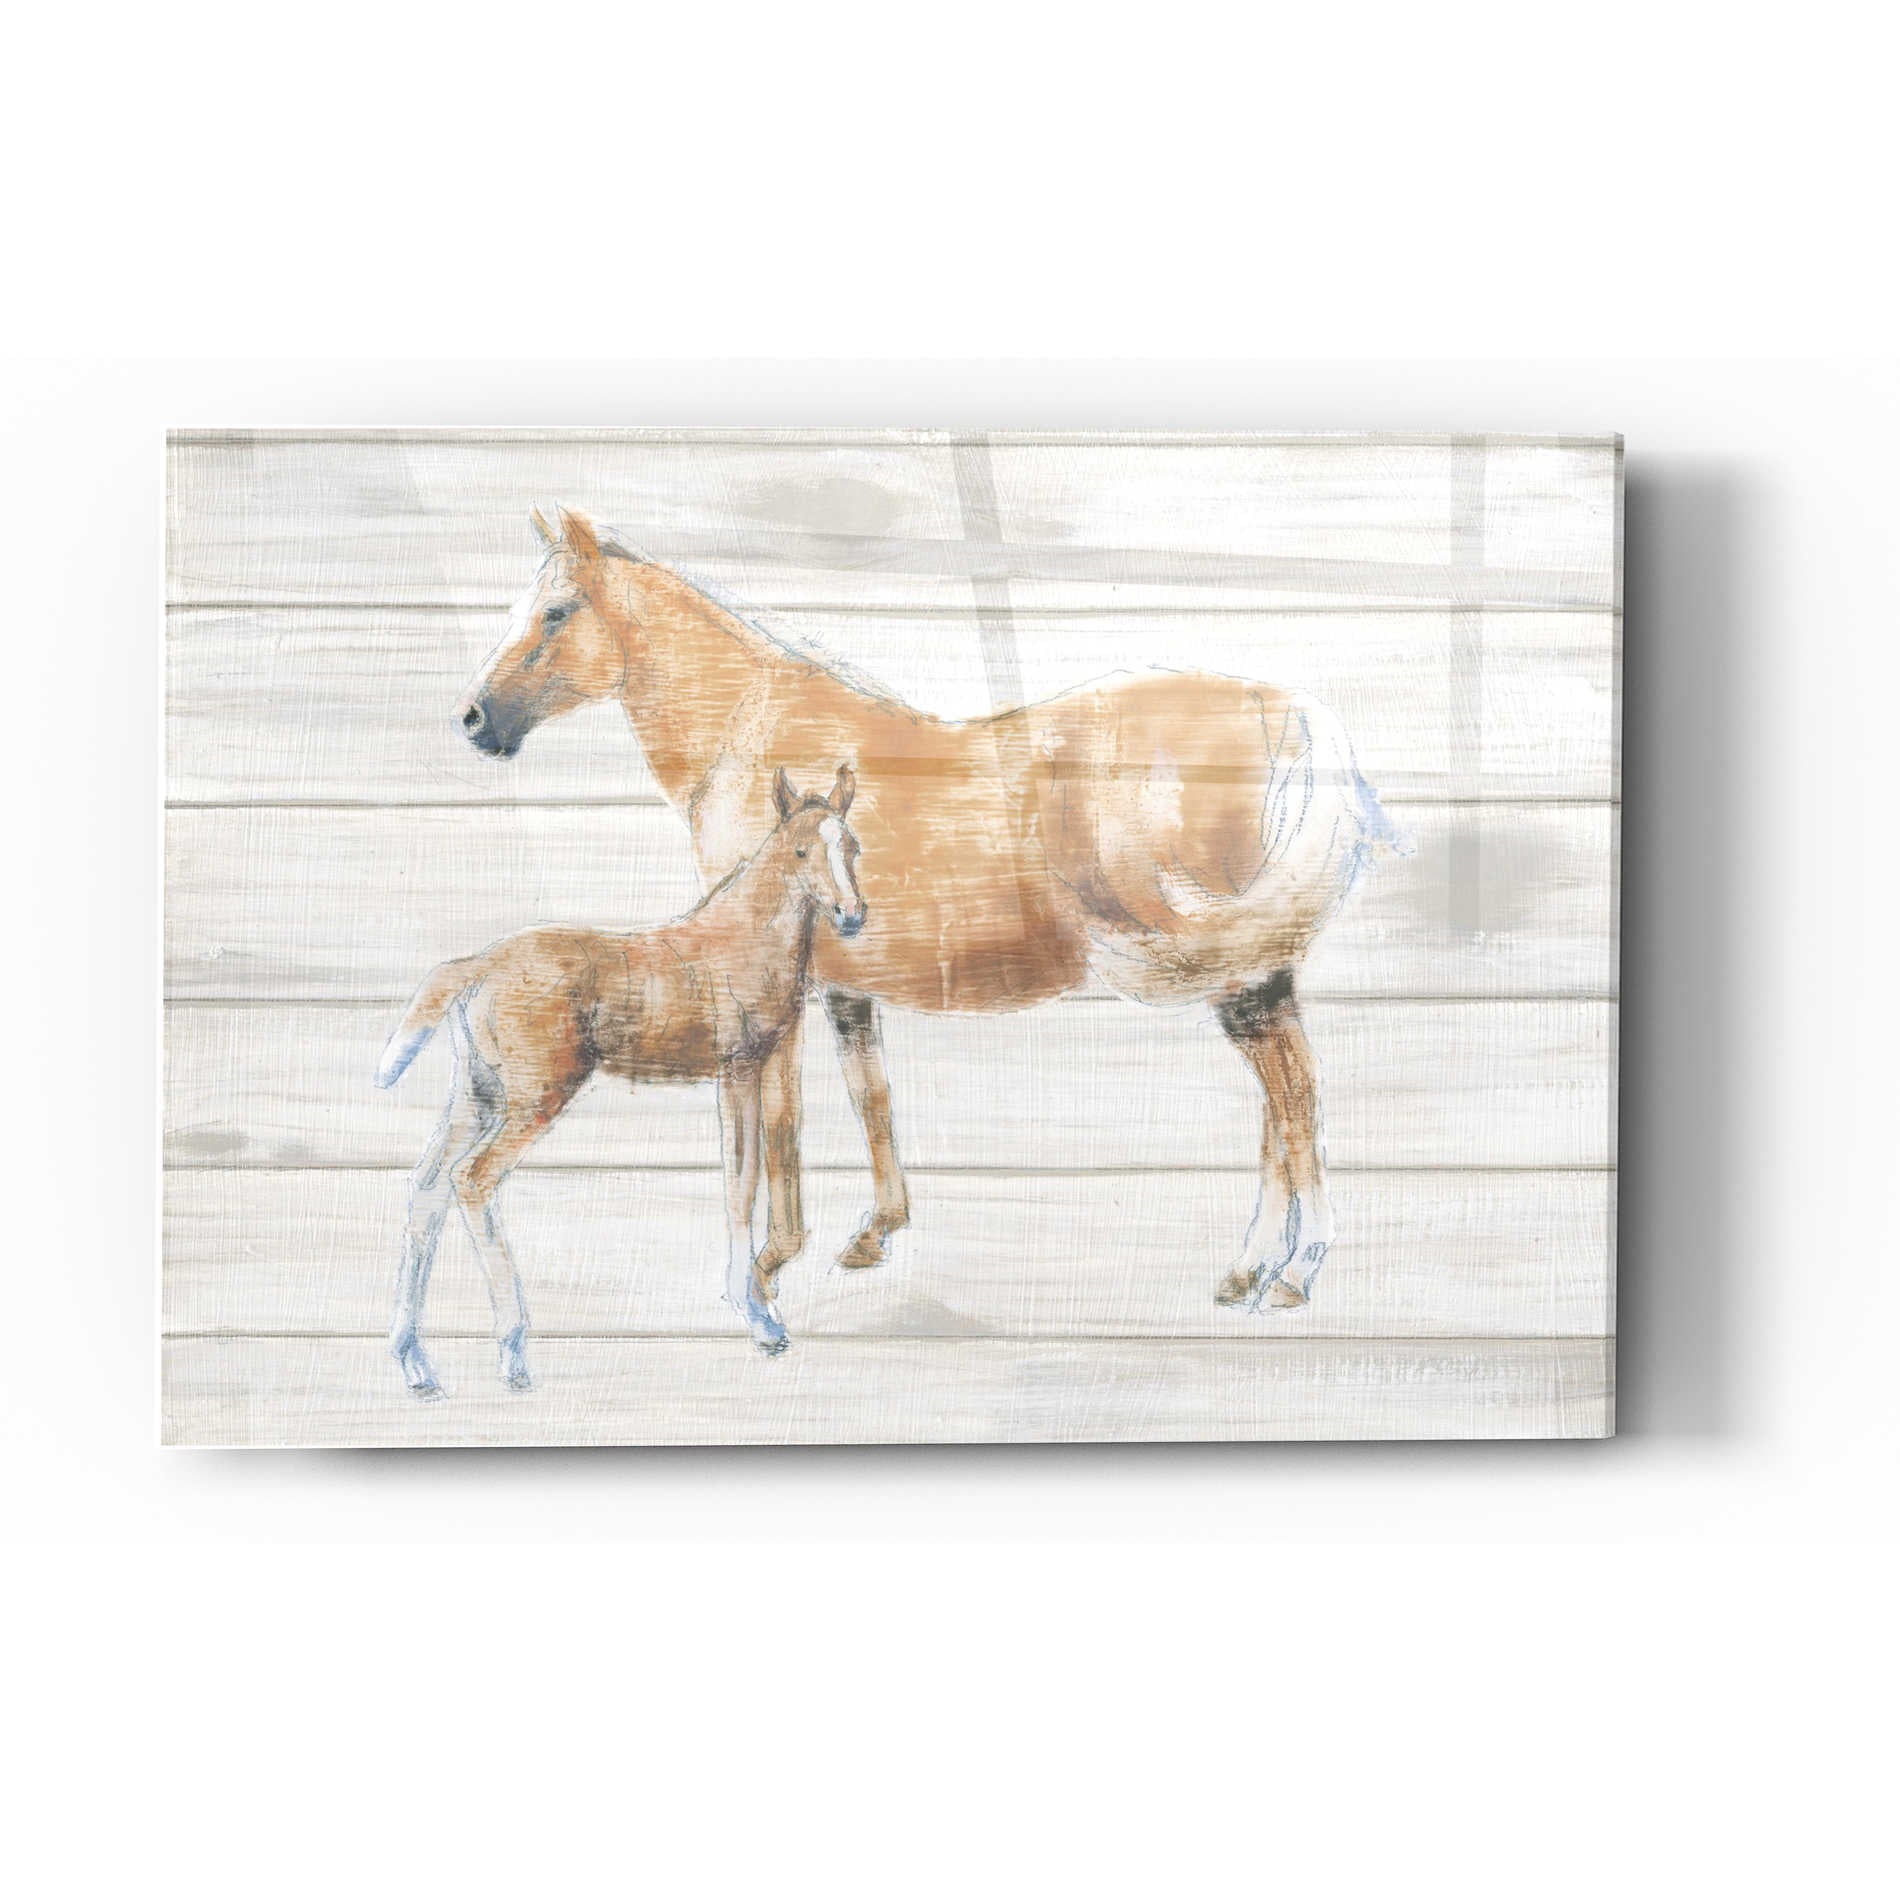 Epic Art 'Horse and Colt on Wood' by Emily Adams, Acrylic Glass Wall Art,16x24